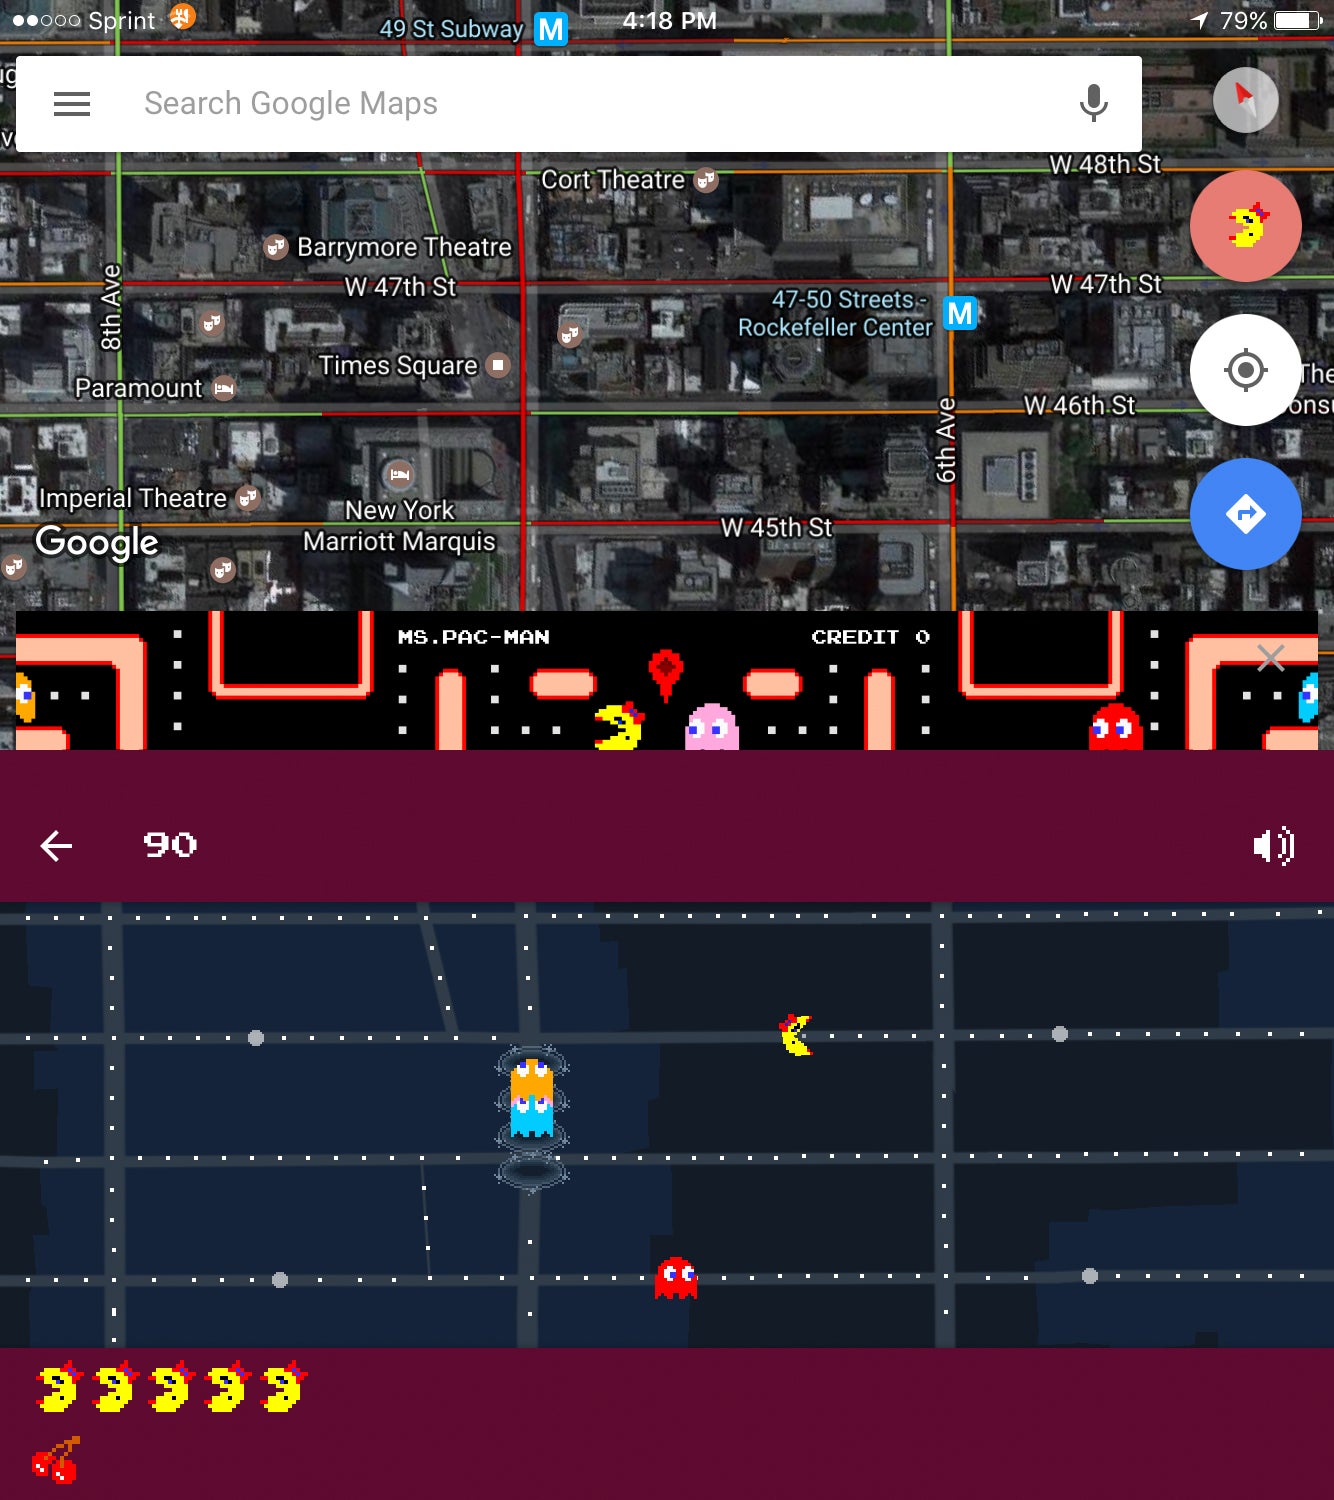 You Can Play Ms. Pac-Man On Google Maps